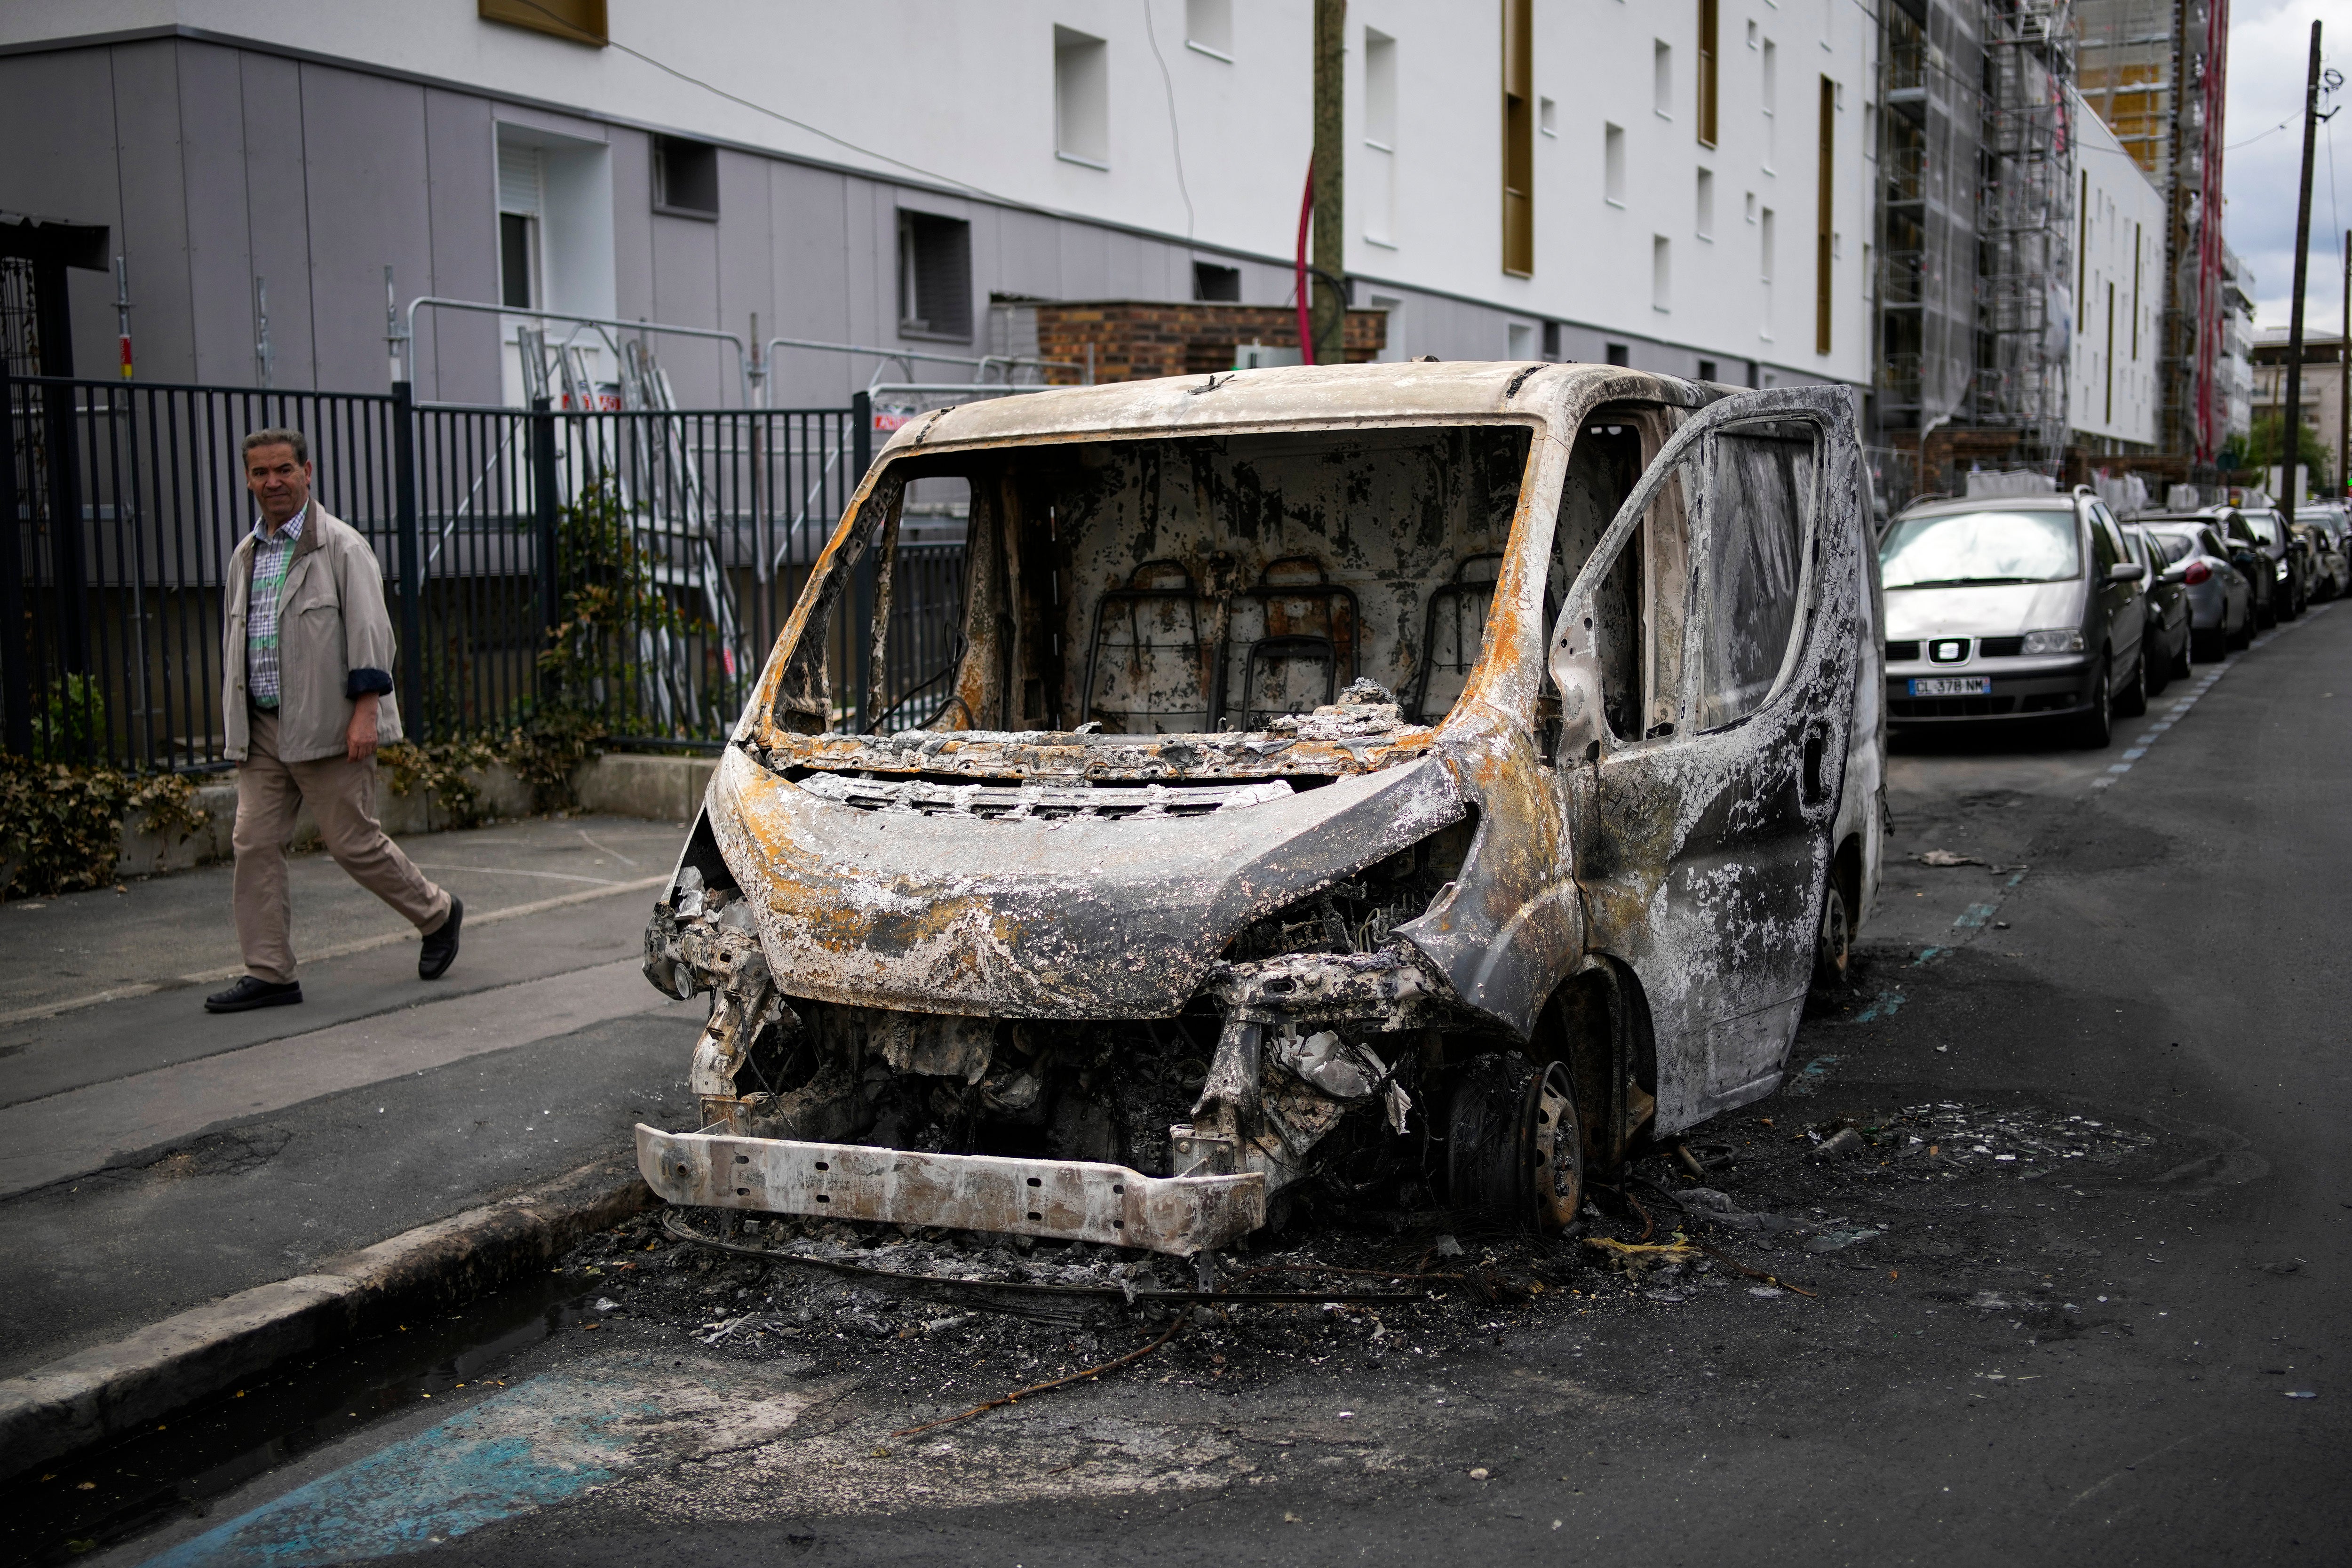 A man walks past a burned van on the aftermath of protests in Colombes, outside Paris on Saturday